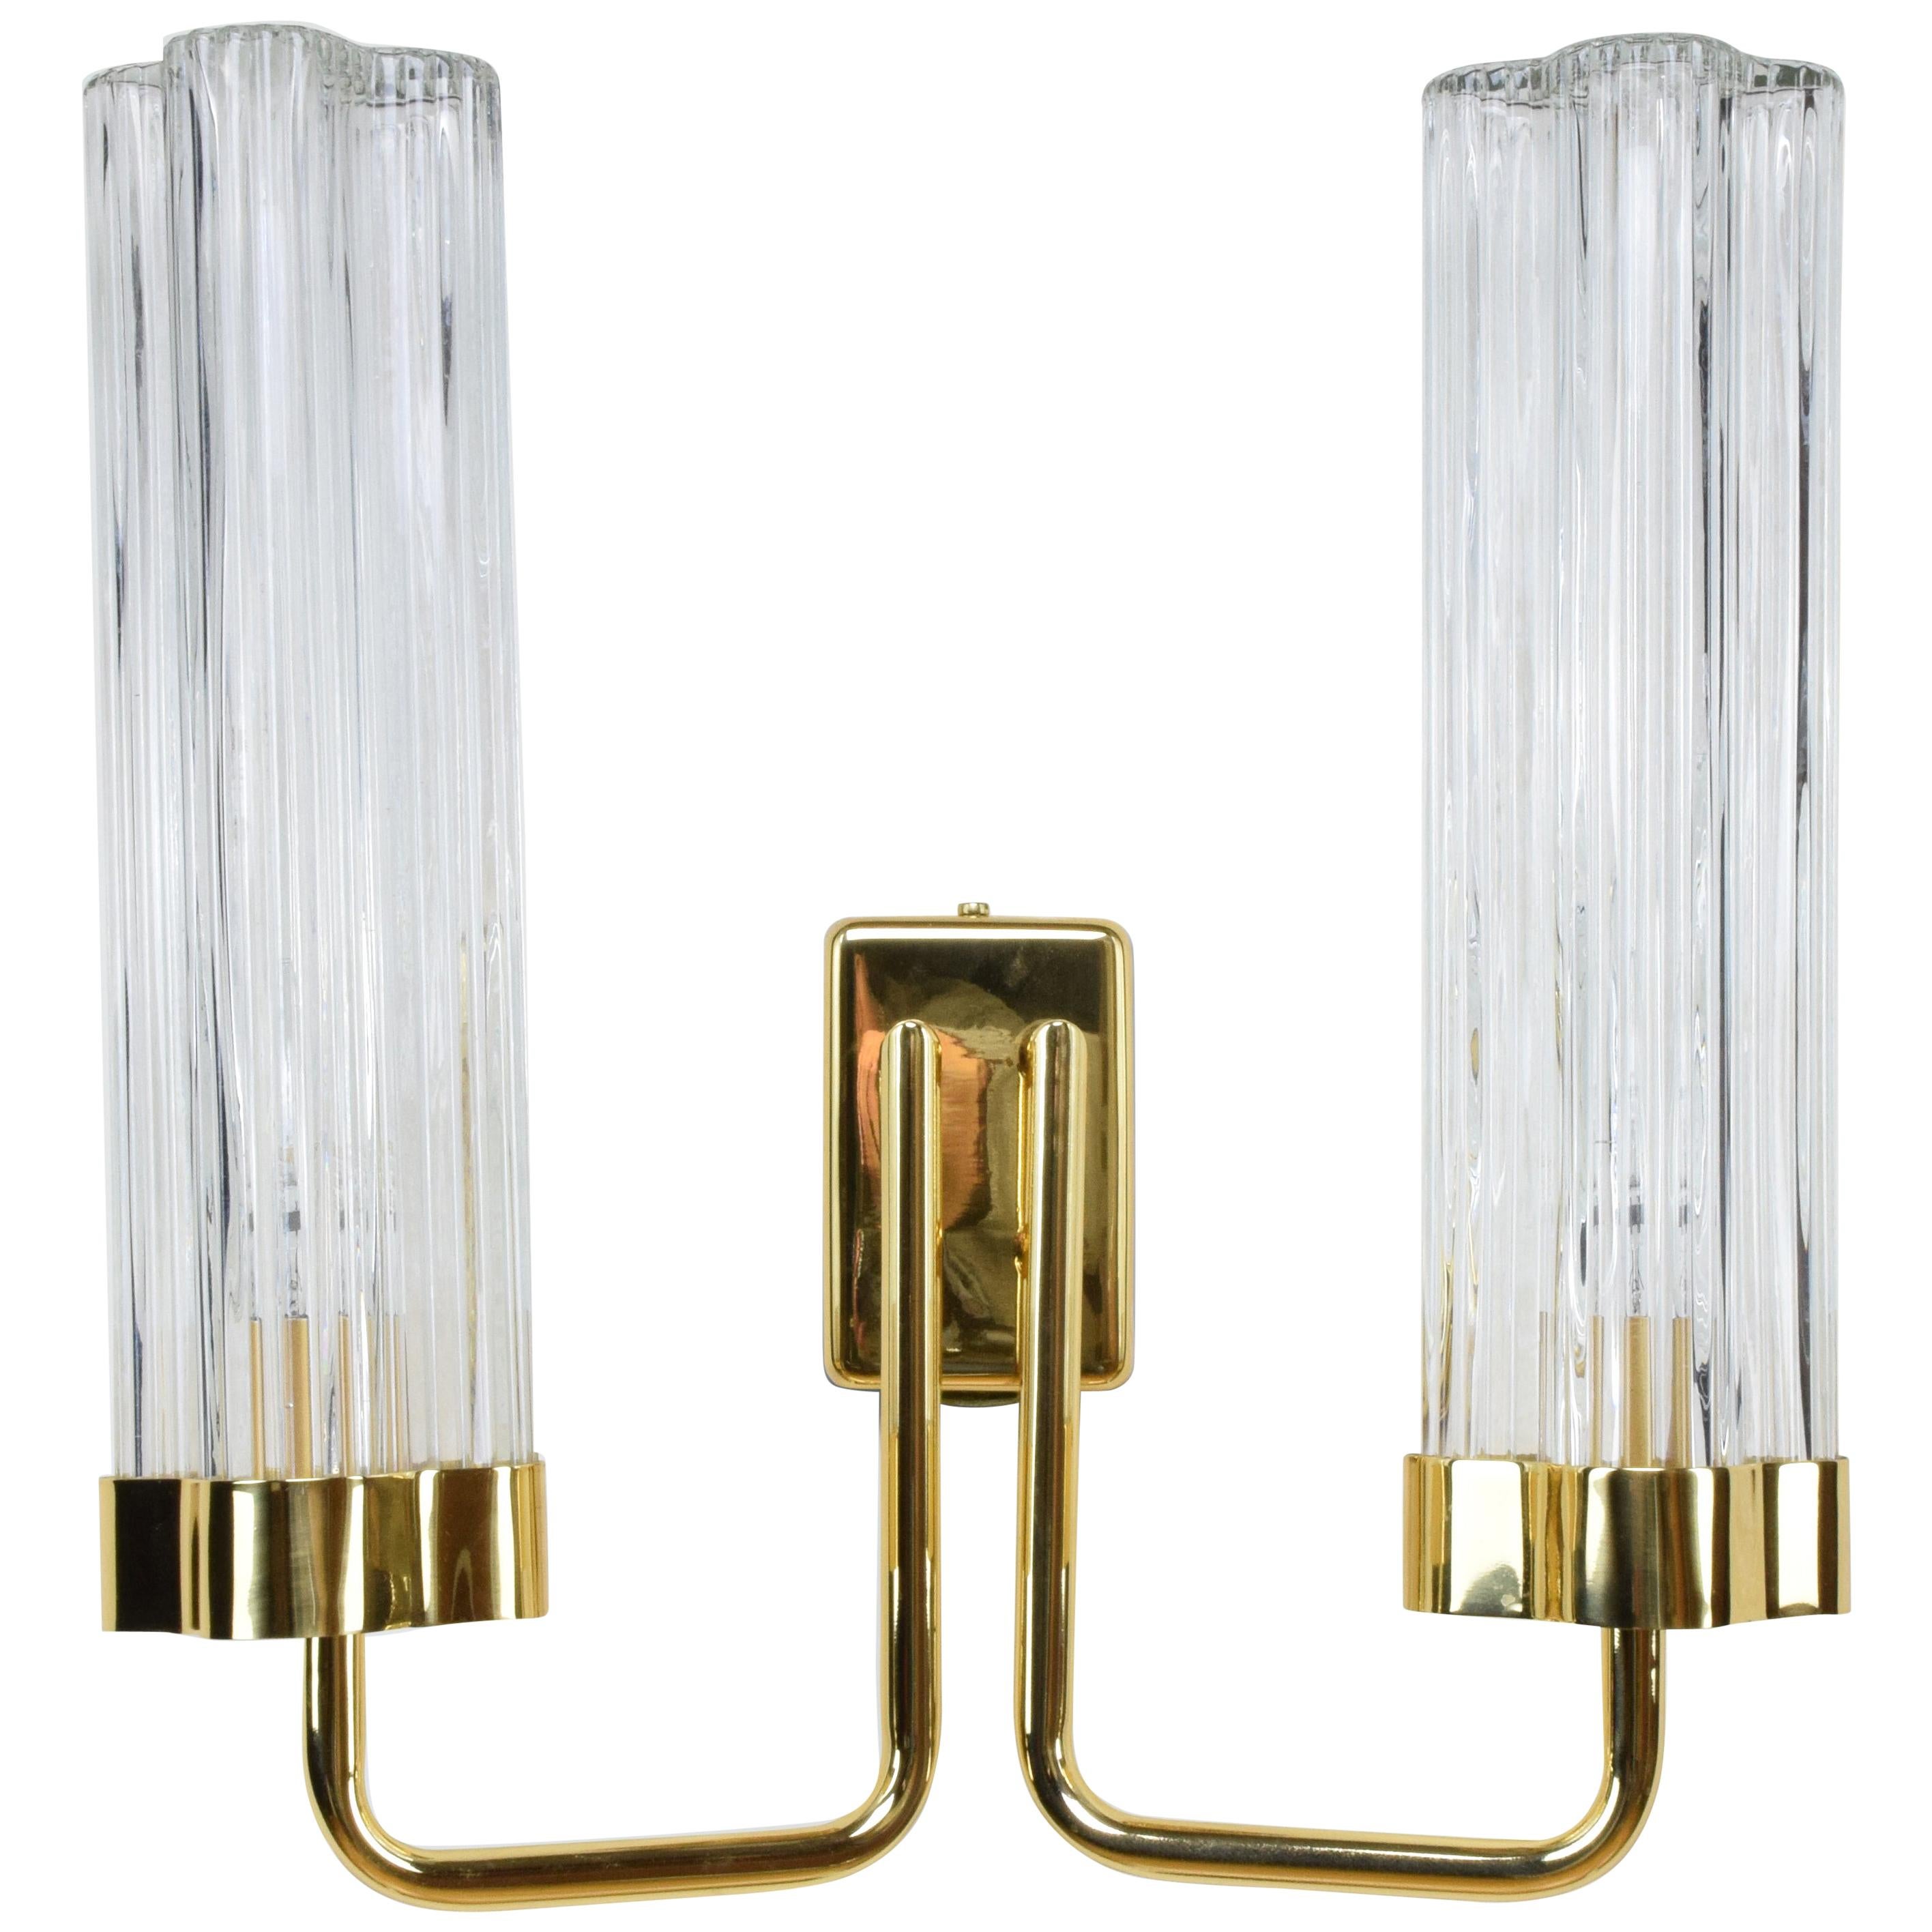 Danghi-W2 Brass and Glass Wall Light, Flow 2 Collection